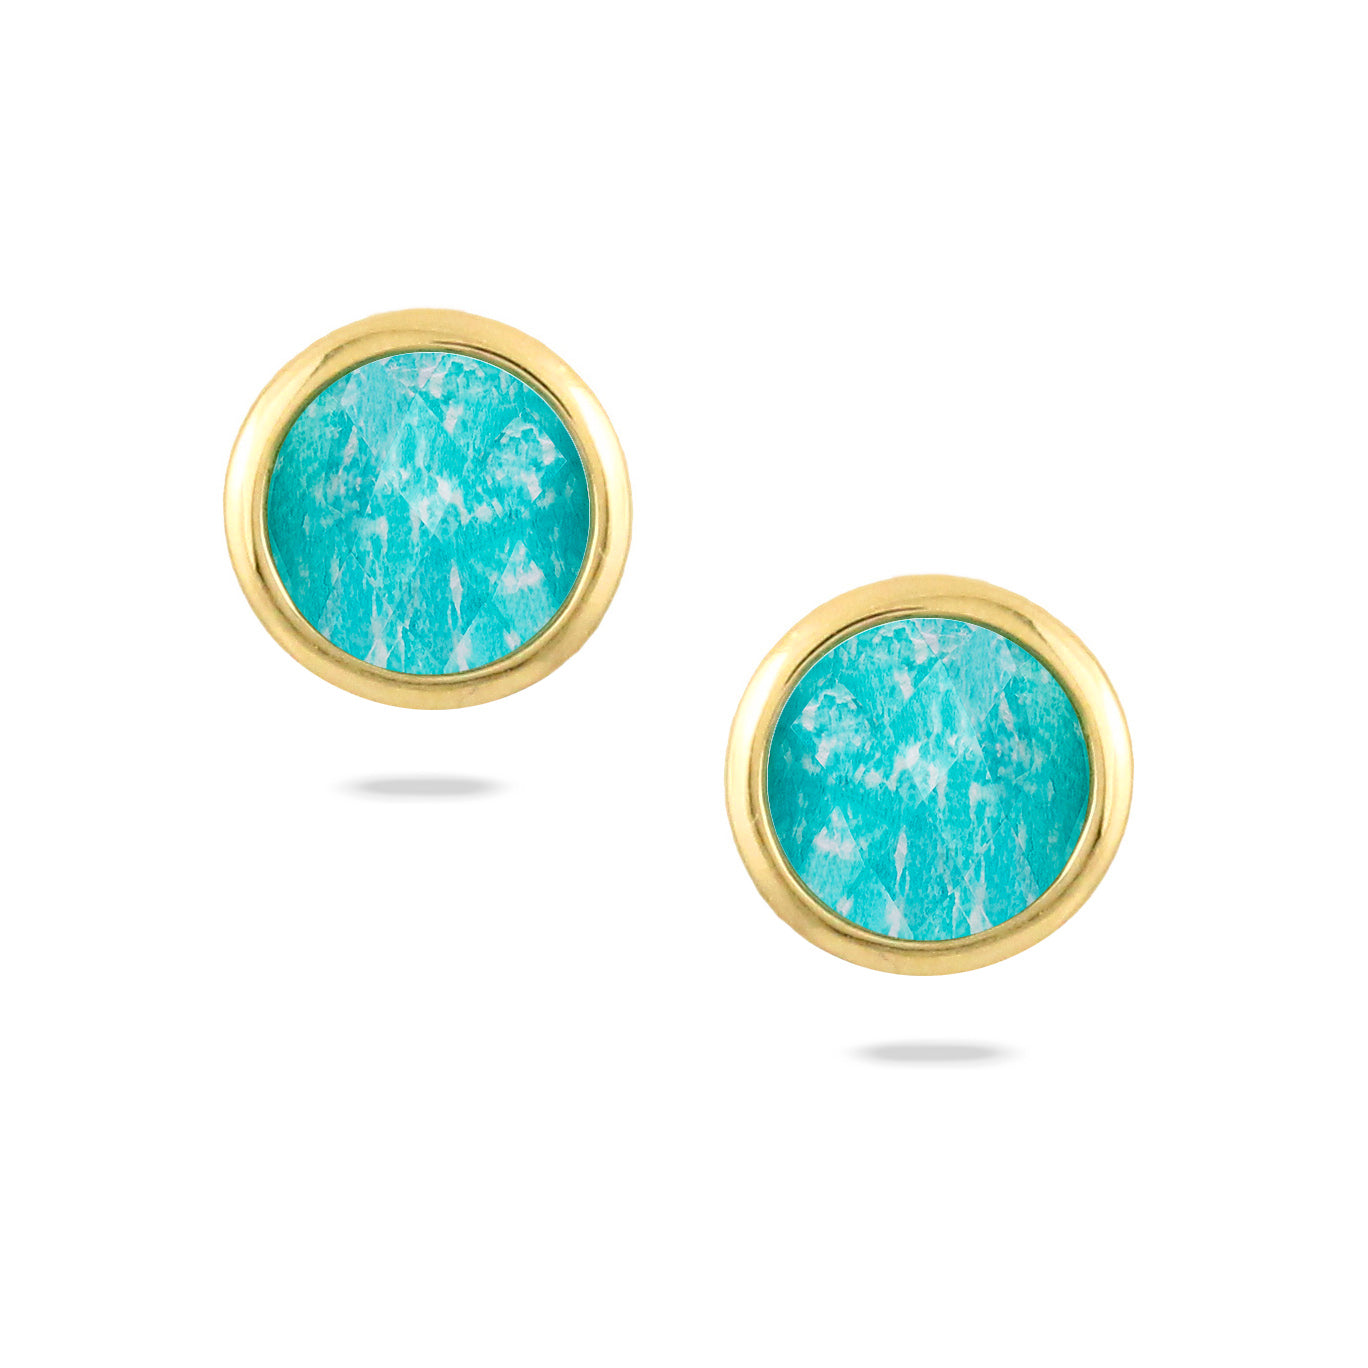 18K YELLOW GOLD EARRING WITH CLEAR QUARTZ OVER AMAZONITE